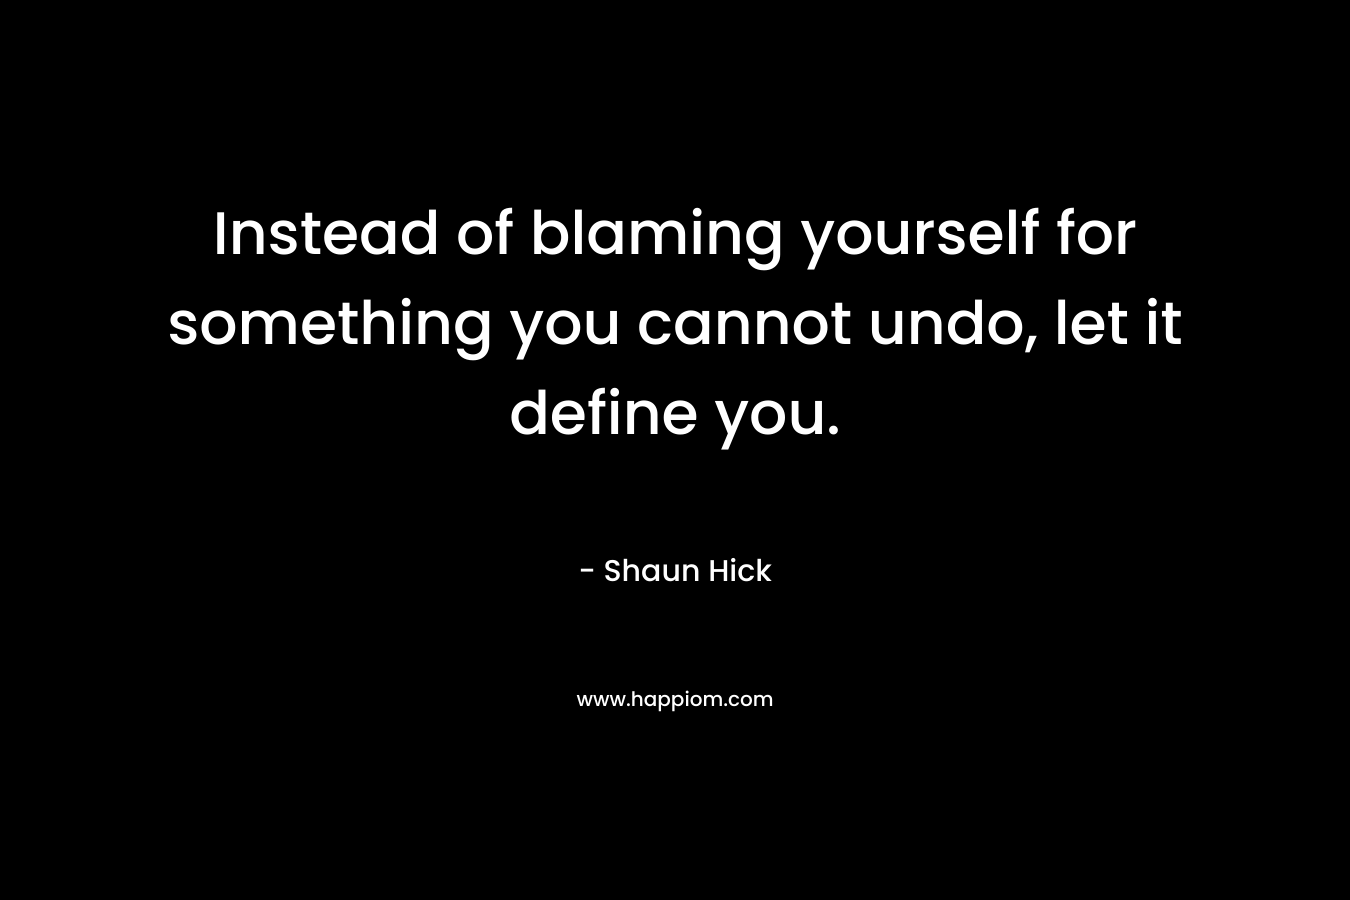 Instead of blaming yourself for something you cannot undo, let it define you. – Shaun Hick